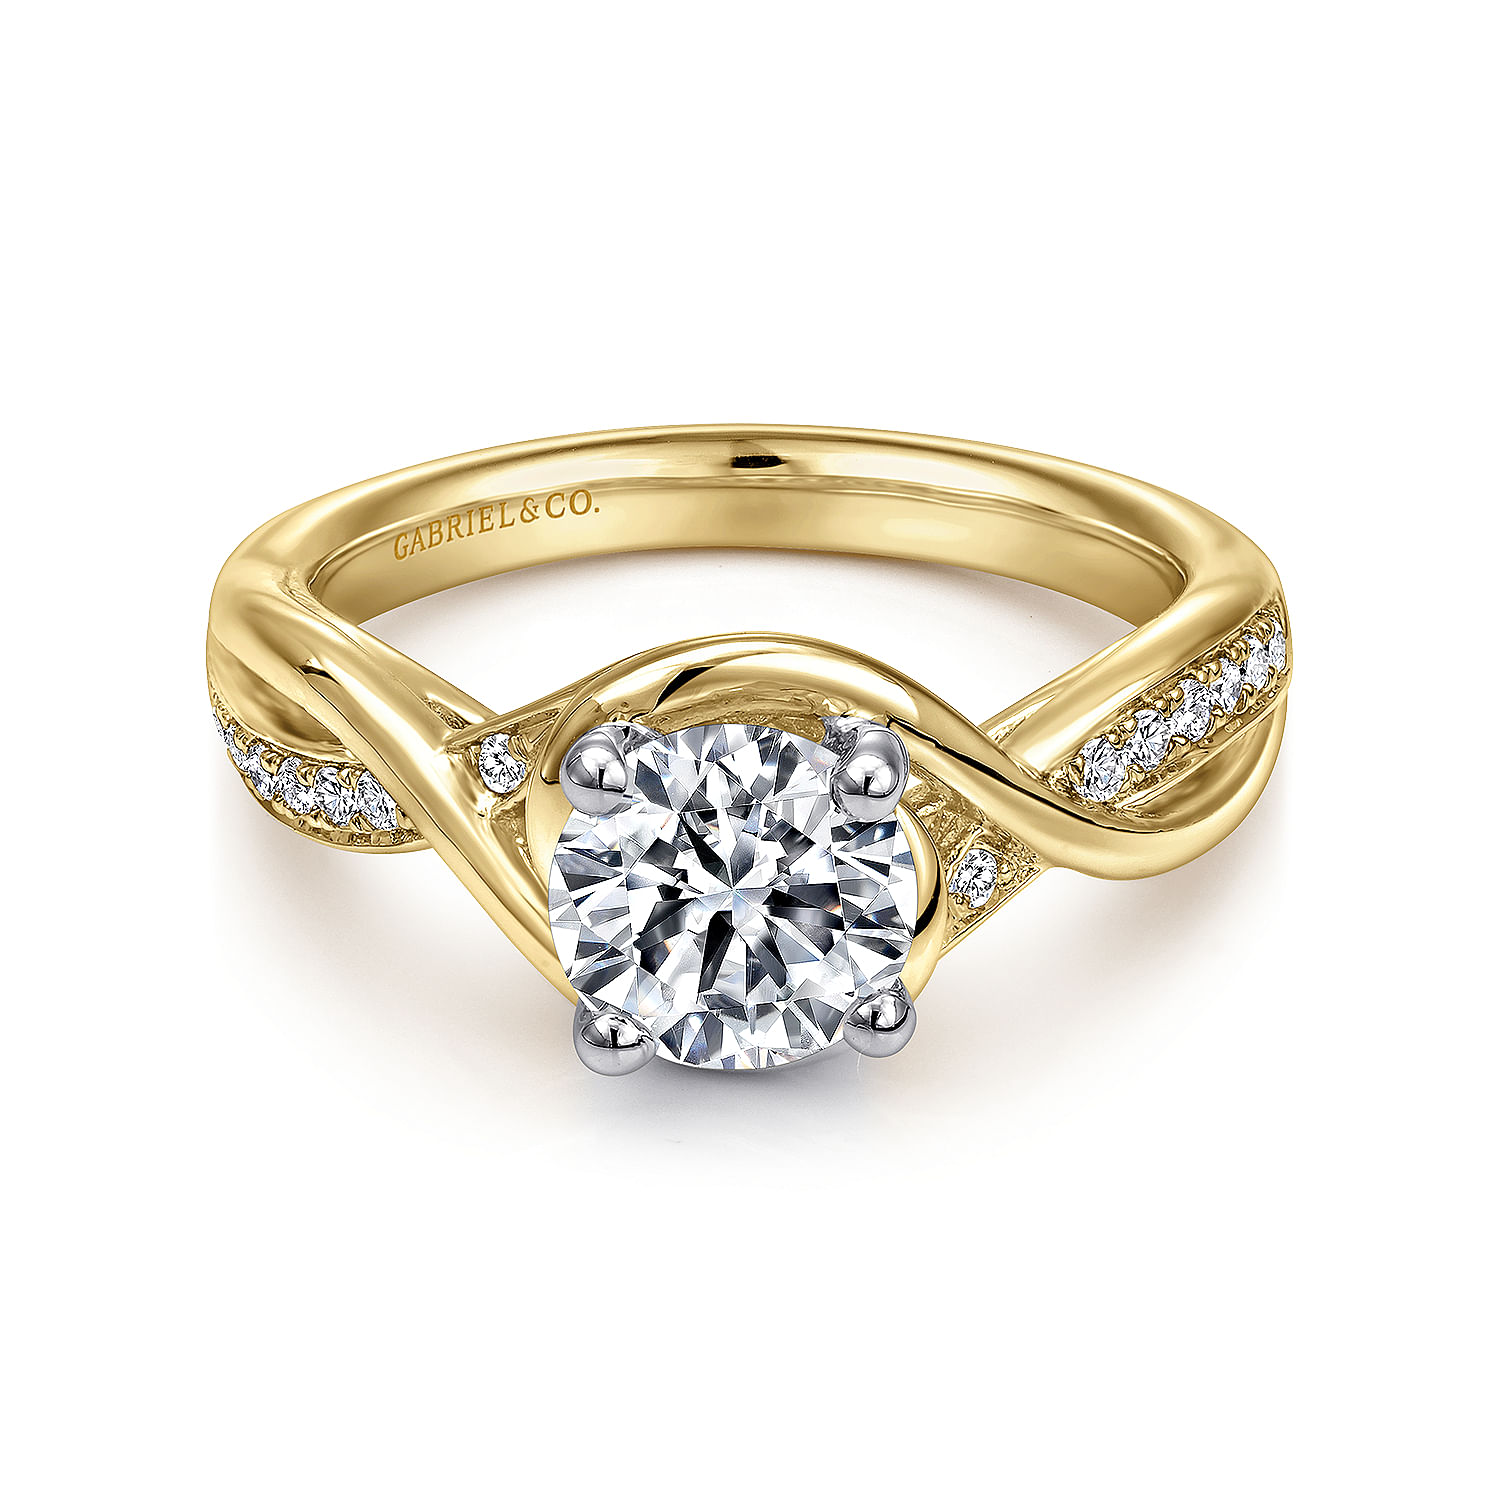 Bailey - 14K White-Yellow Gold Round Diamond Bypass Channel Set Engagement Ring